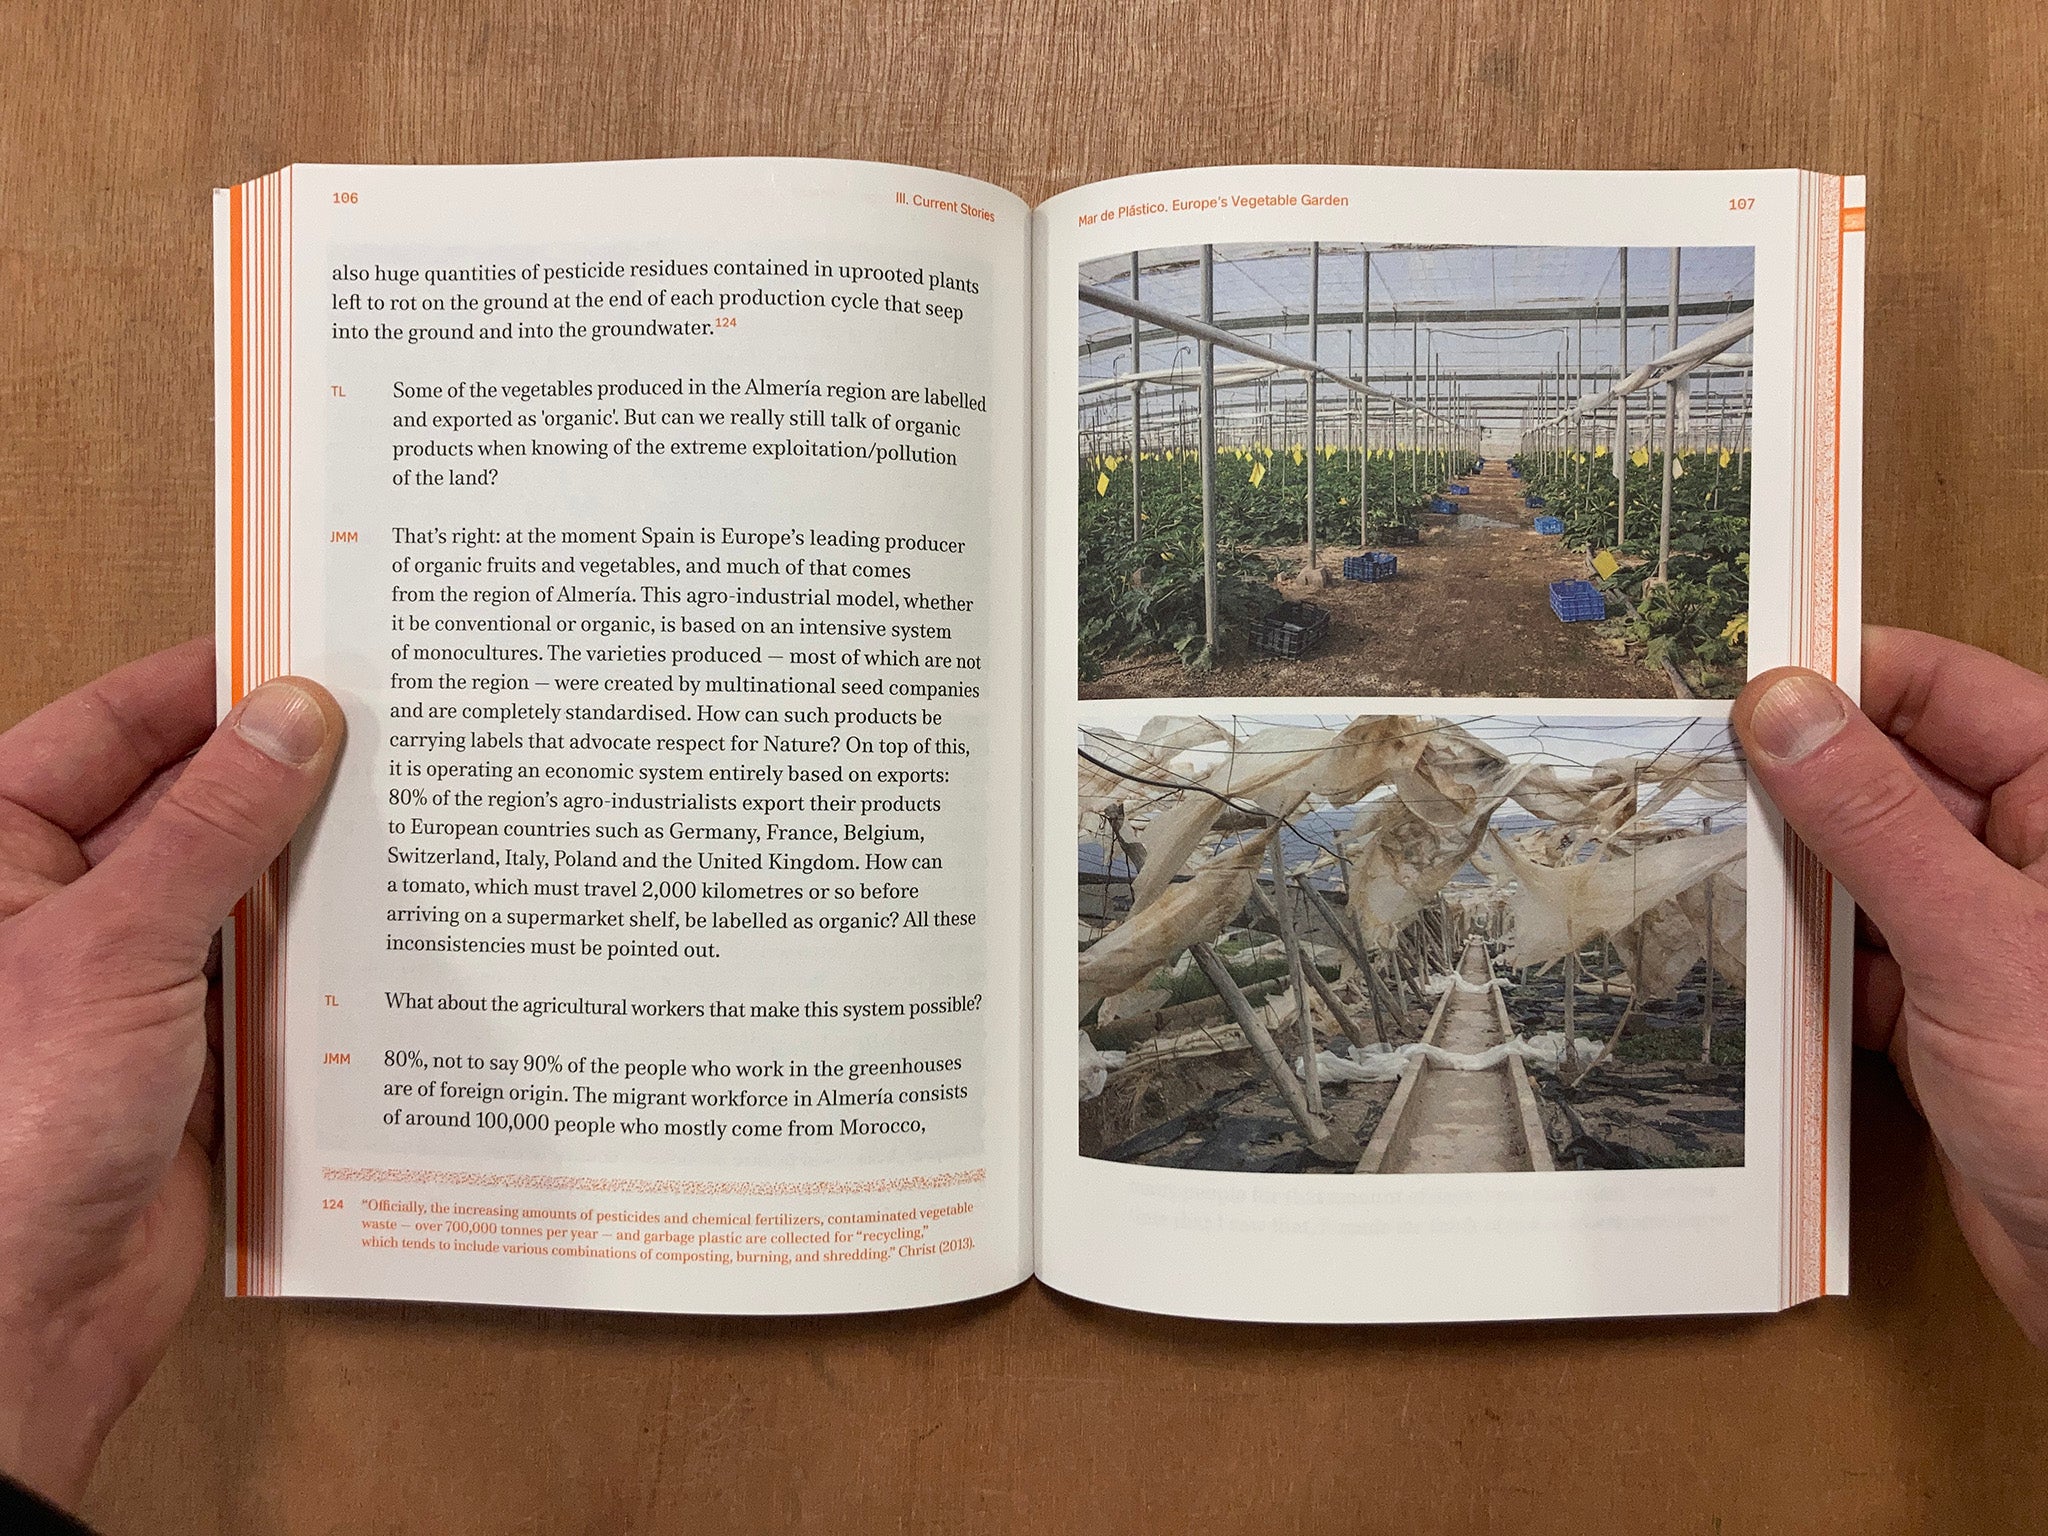 GREENHOUSE STORIES: A CRITICAL RE-EXAMINATION OF TRANSPARENT MICROCOSMS edited by d-o-t-s (Laura Drouet, Olivier Lacrouts)